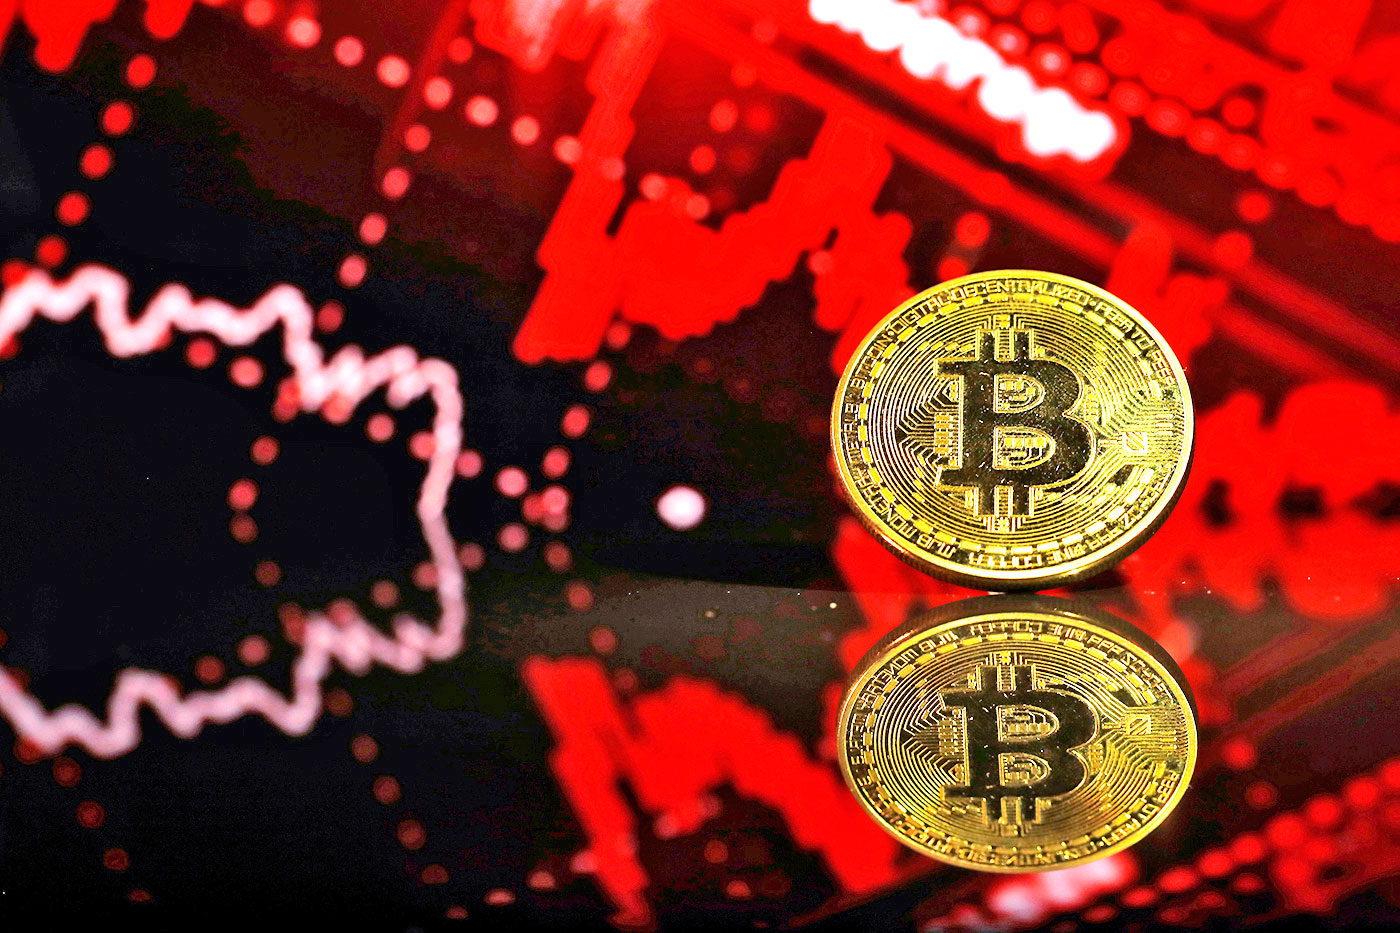 Cryptocurrencies: Crypto hedge funds attracted new money despite bitcoin losses in 2018